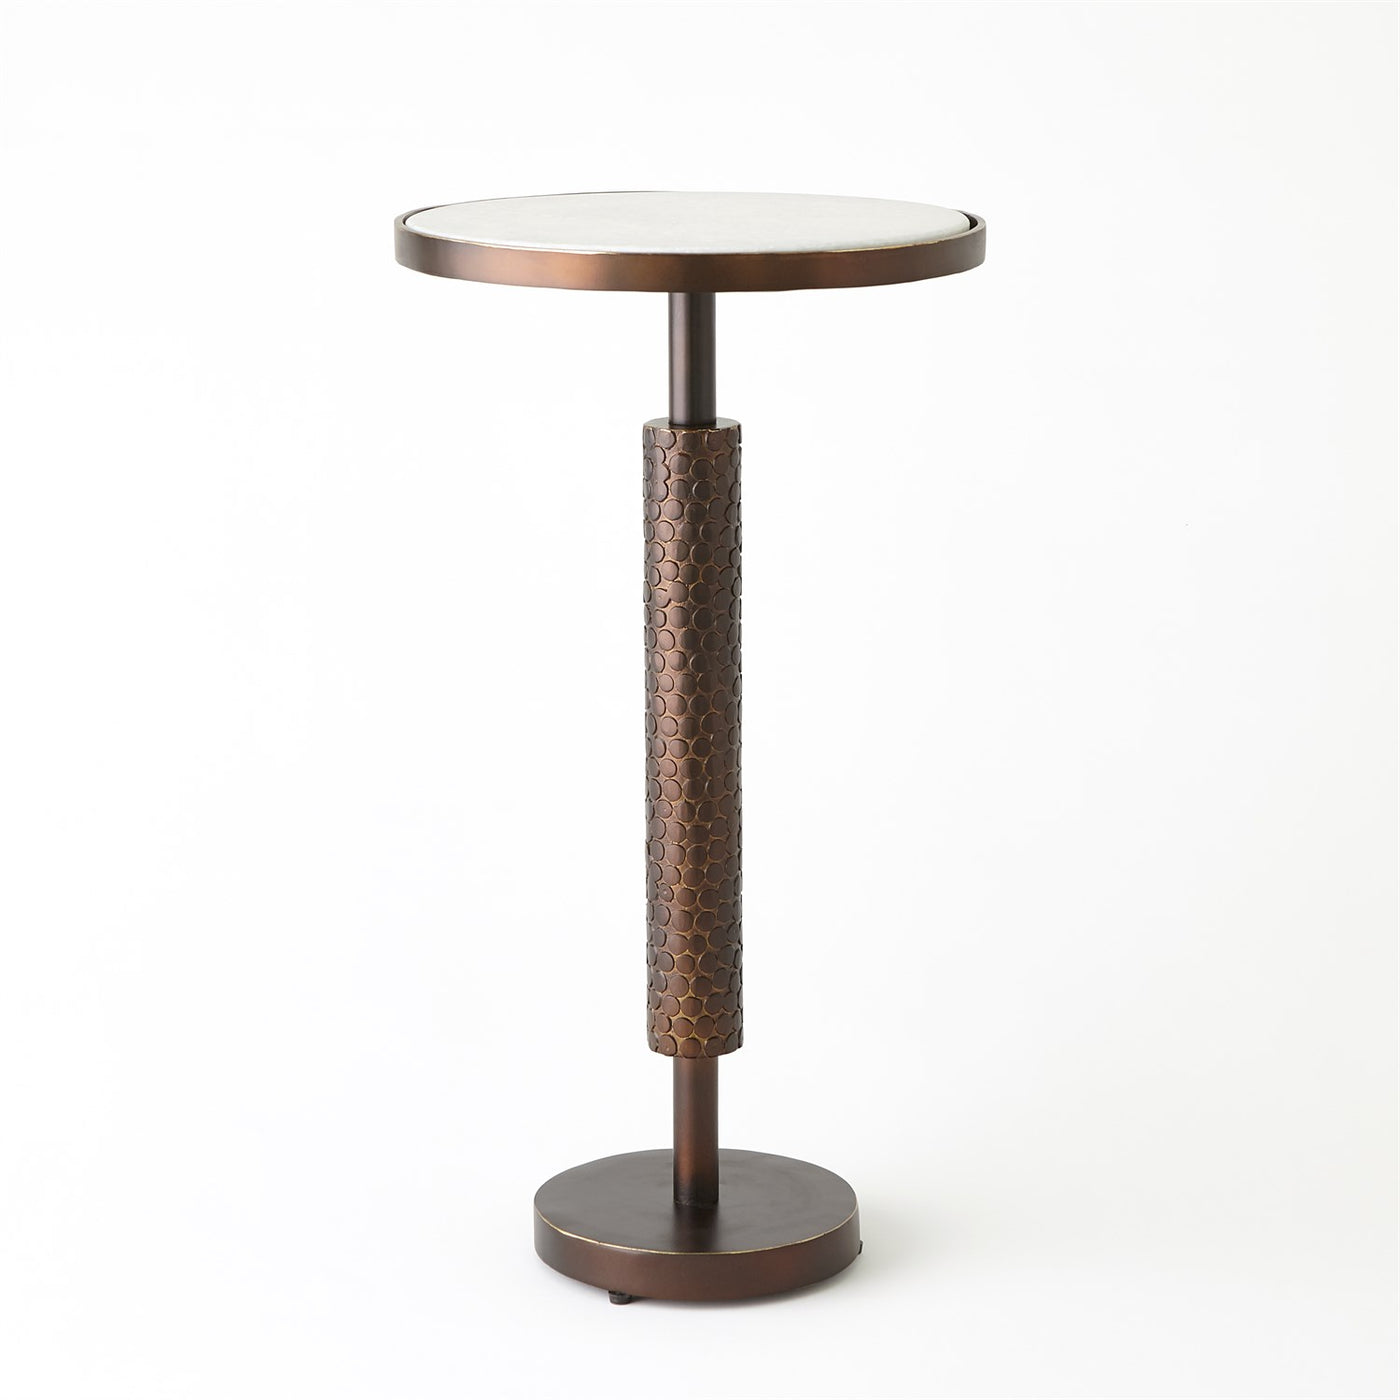 TABLE HAMMERED BRONZE WITH WHITE MARBLE ROUND